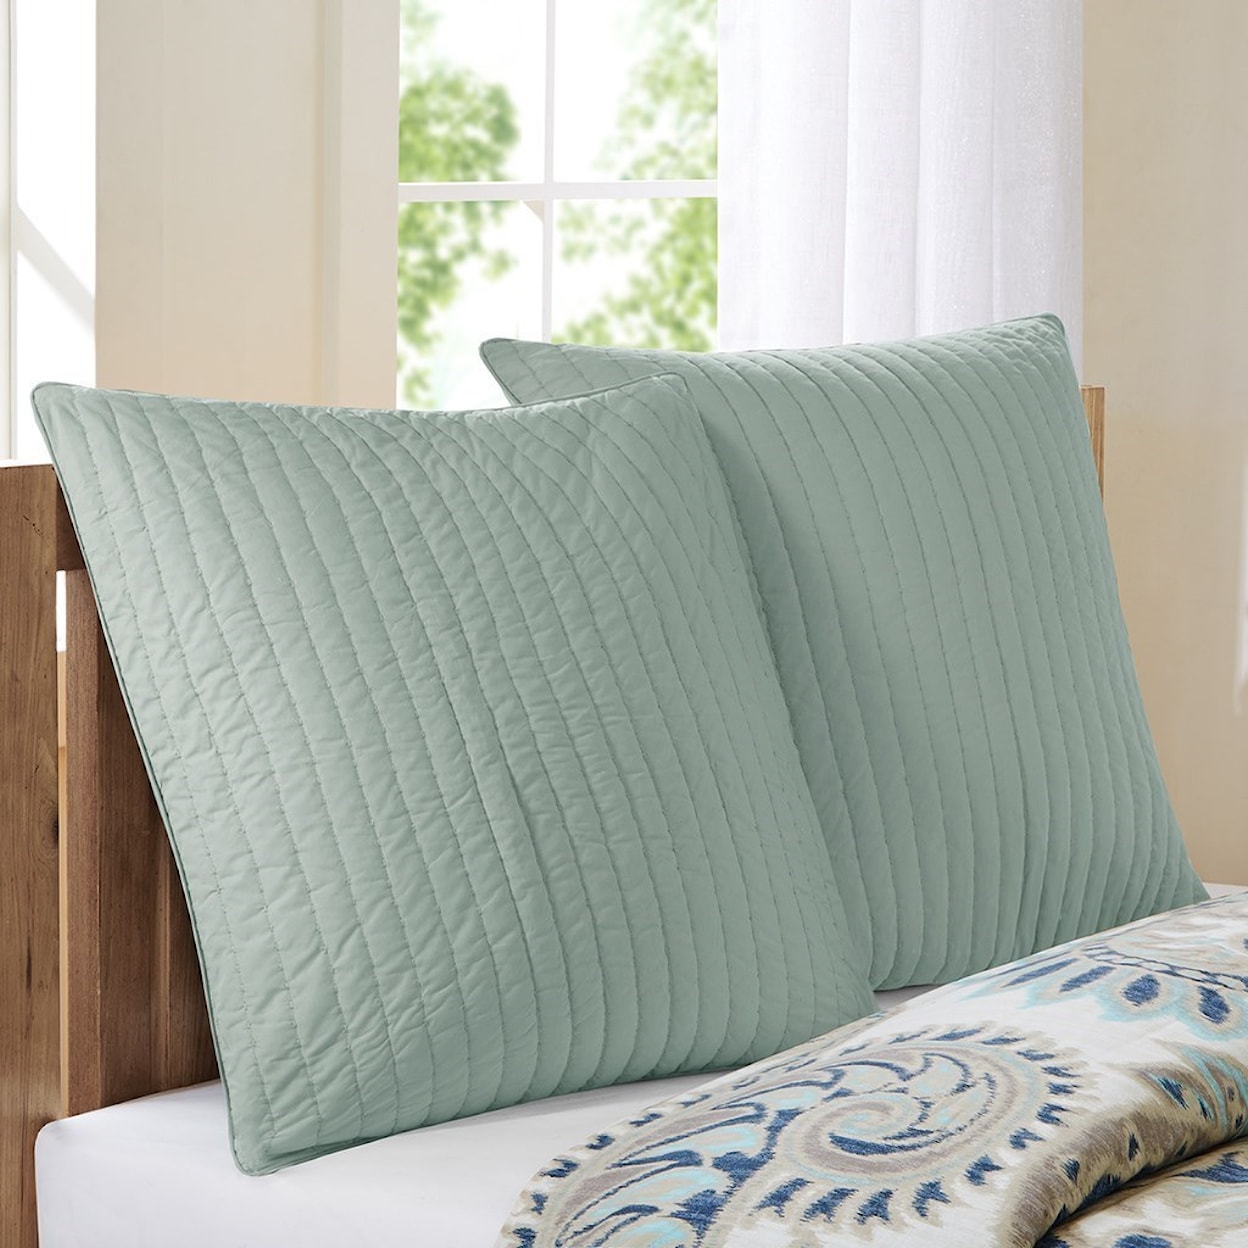 JLA Home Ink+Ivy Quilted Euro Sham